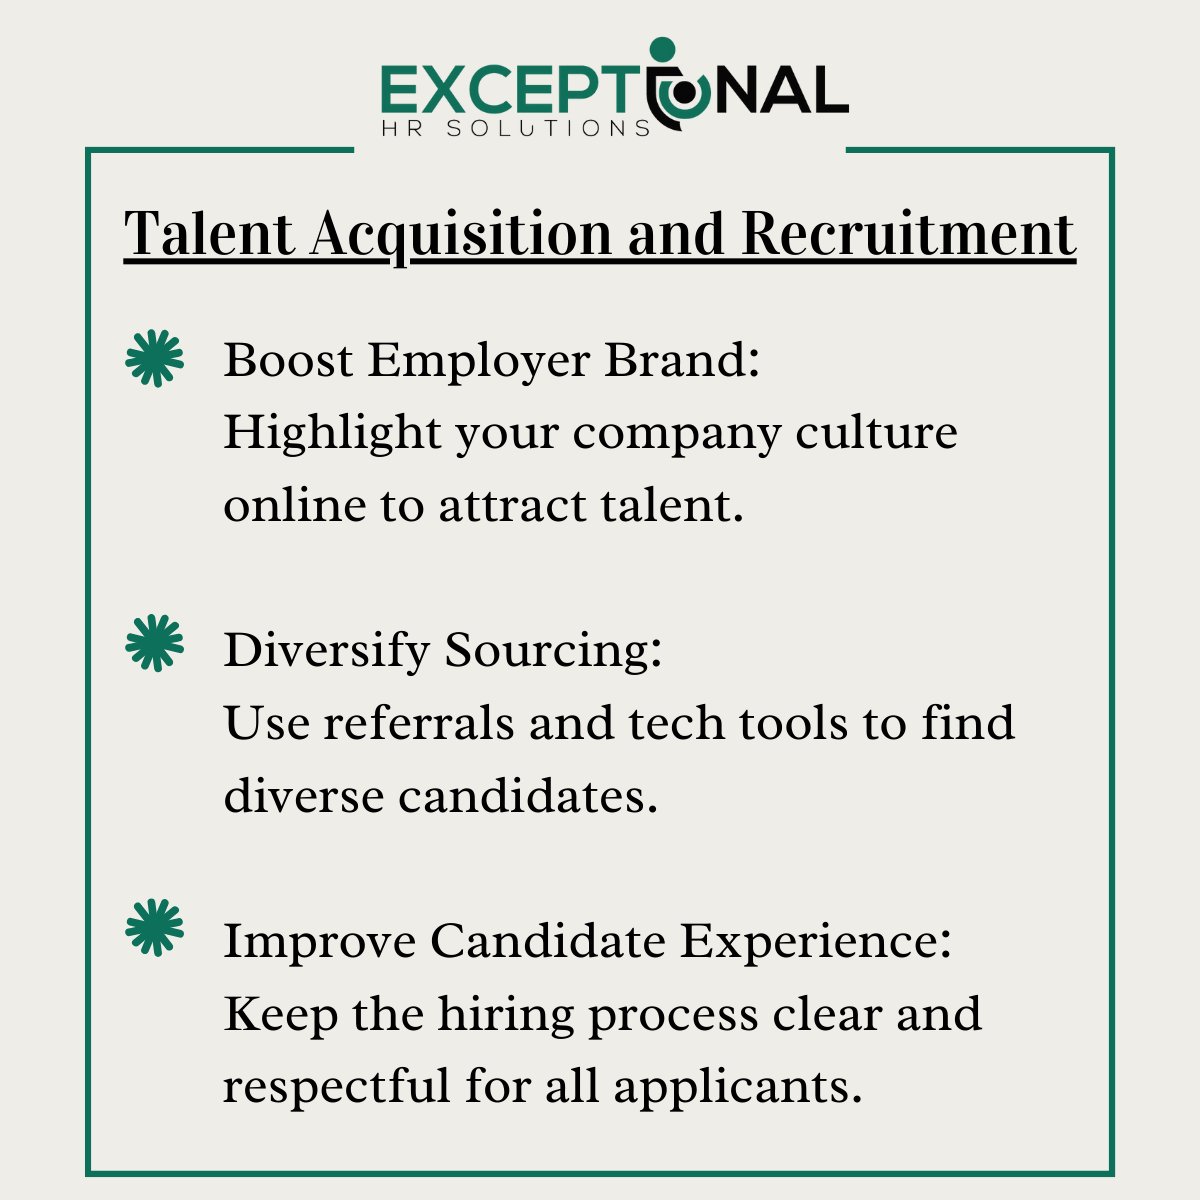 From boosting employer branding to enhancing candidate experiences, elevate your talent acquisition strategy today. #HR #TalentAcquisition #RecruitmentTips